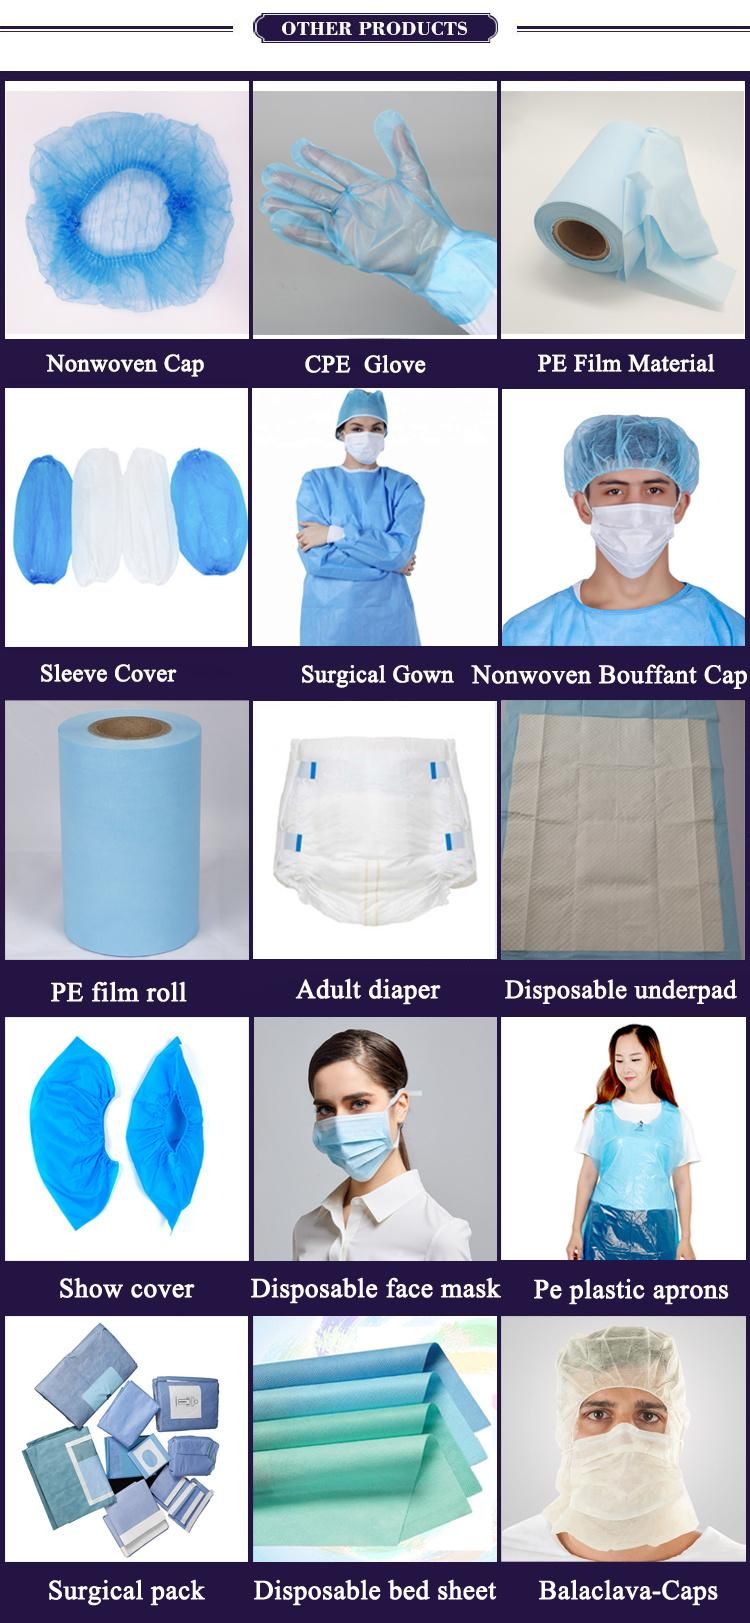 Large Size Wholesales Adult Personal Care Bed Pads Disposable Waterproof Incontinence Underpad